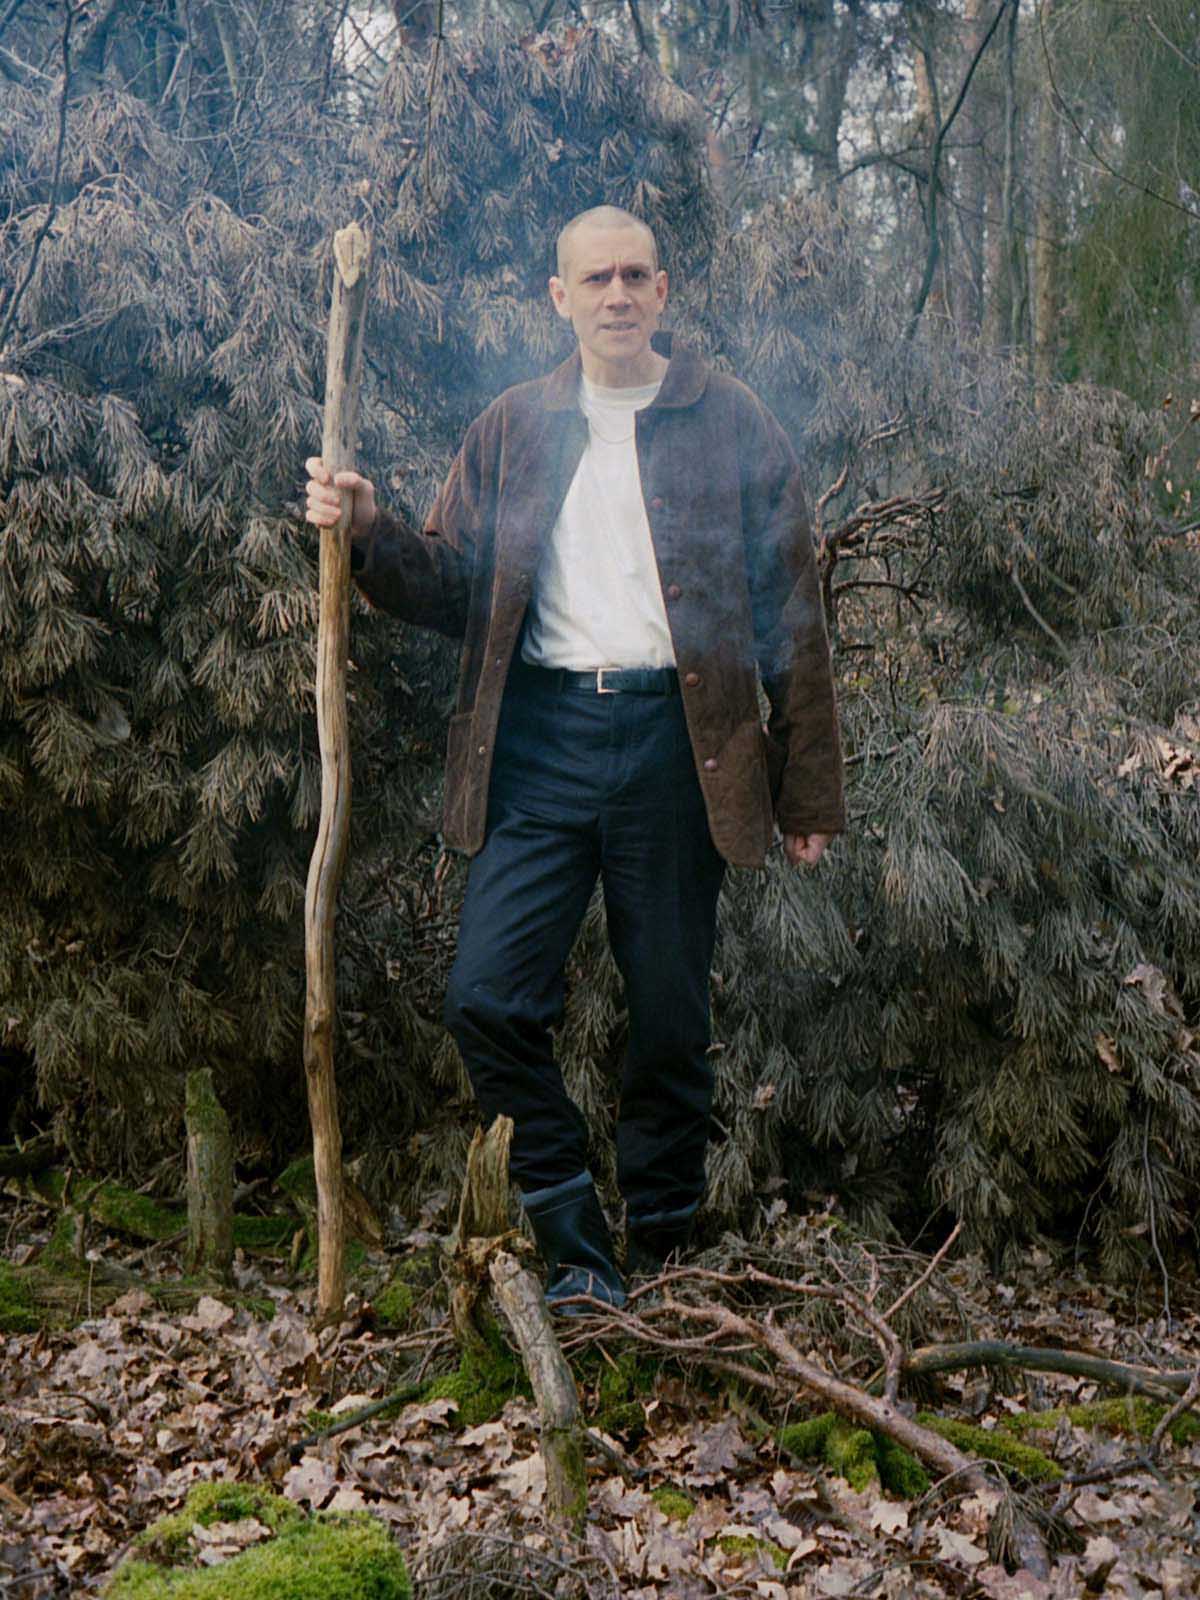 White, middle-aged man with shaved bald head, white T-shirt, dark blue jeans and brown jacket leans on a branch in his right hand as if on a walking stick. Das Kinn is in the forest in front of a bushy branch with many twigs and needles.